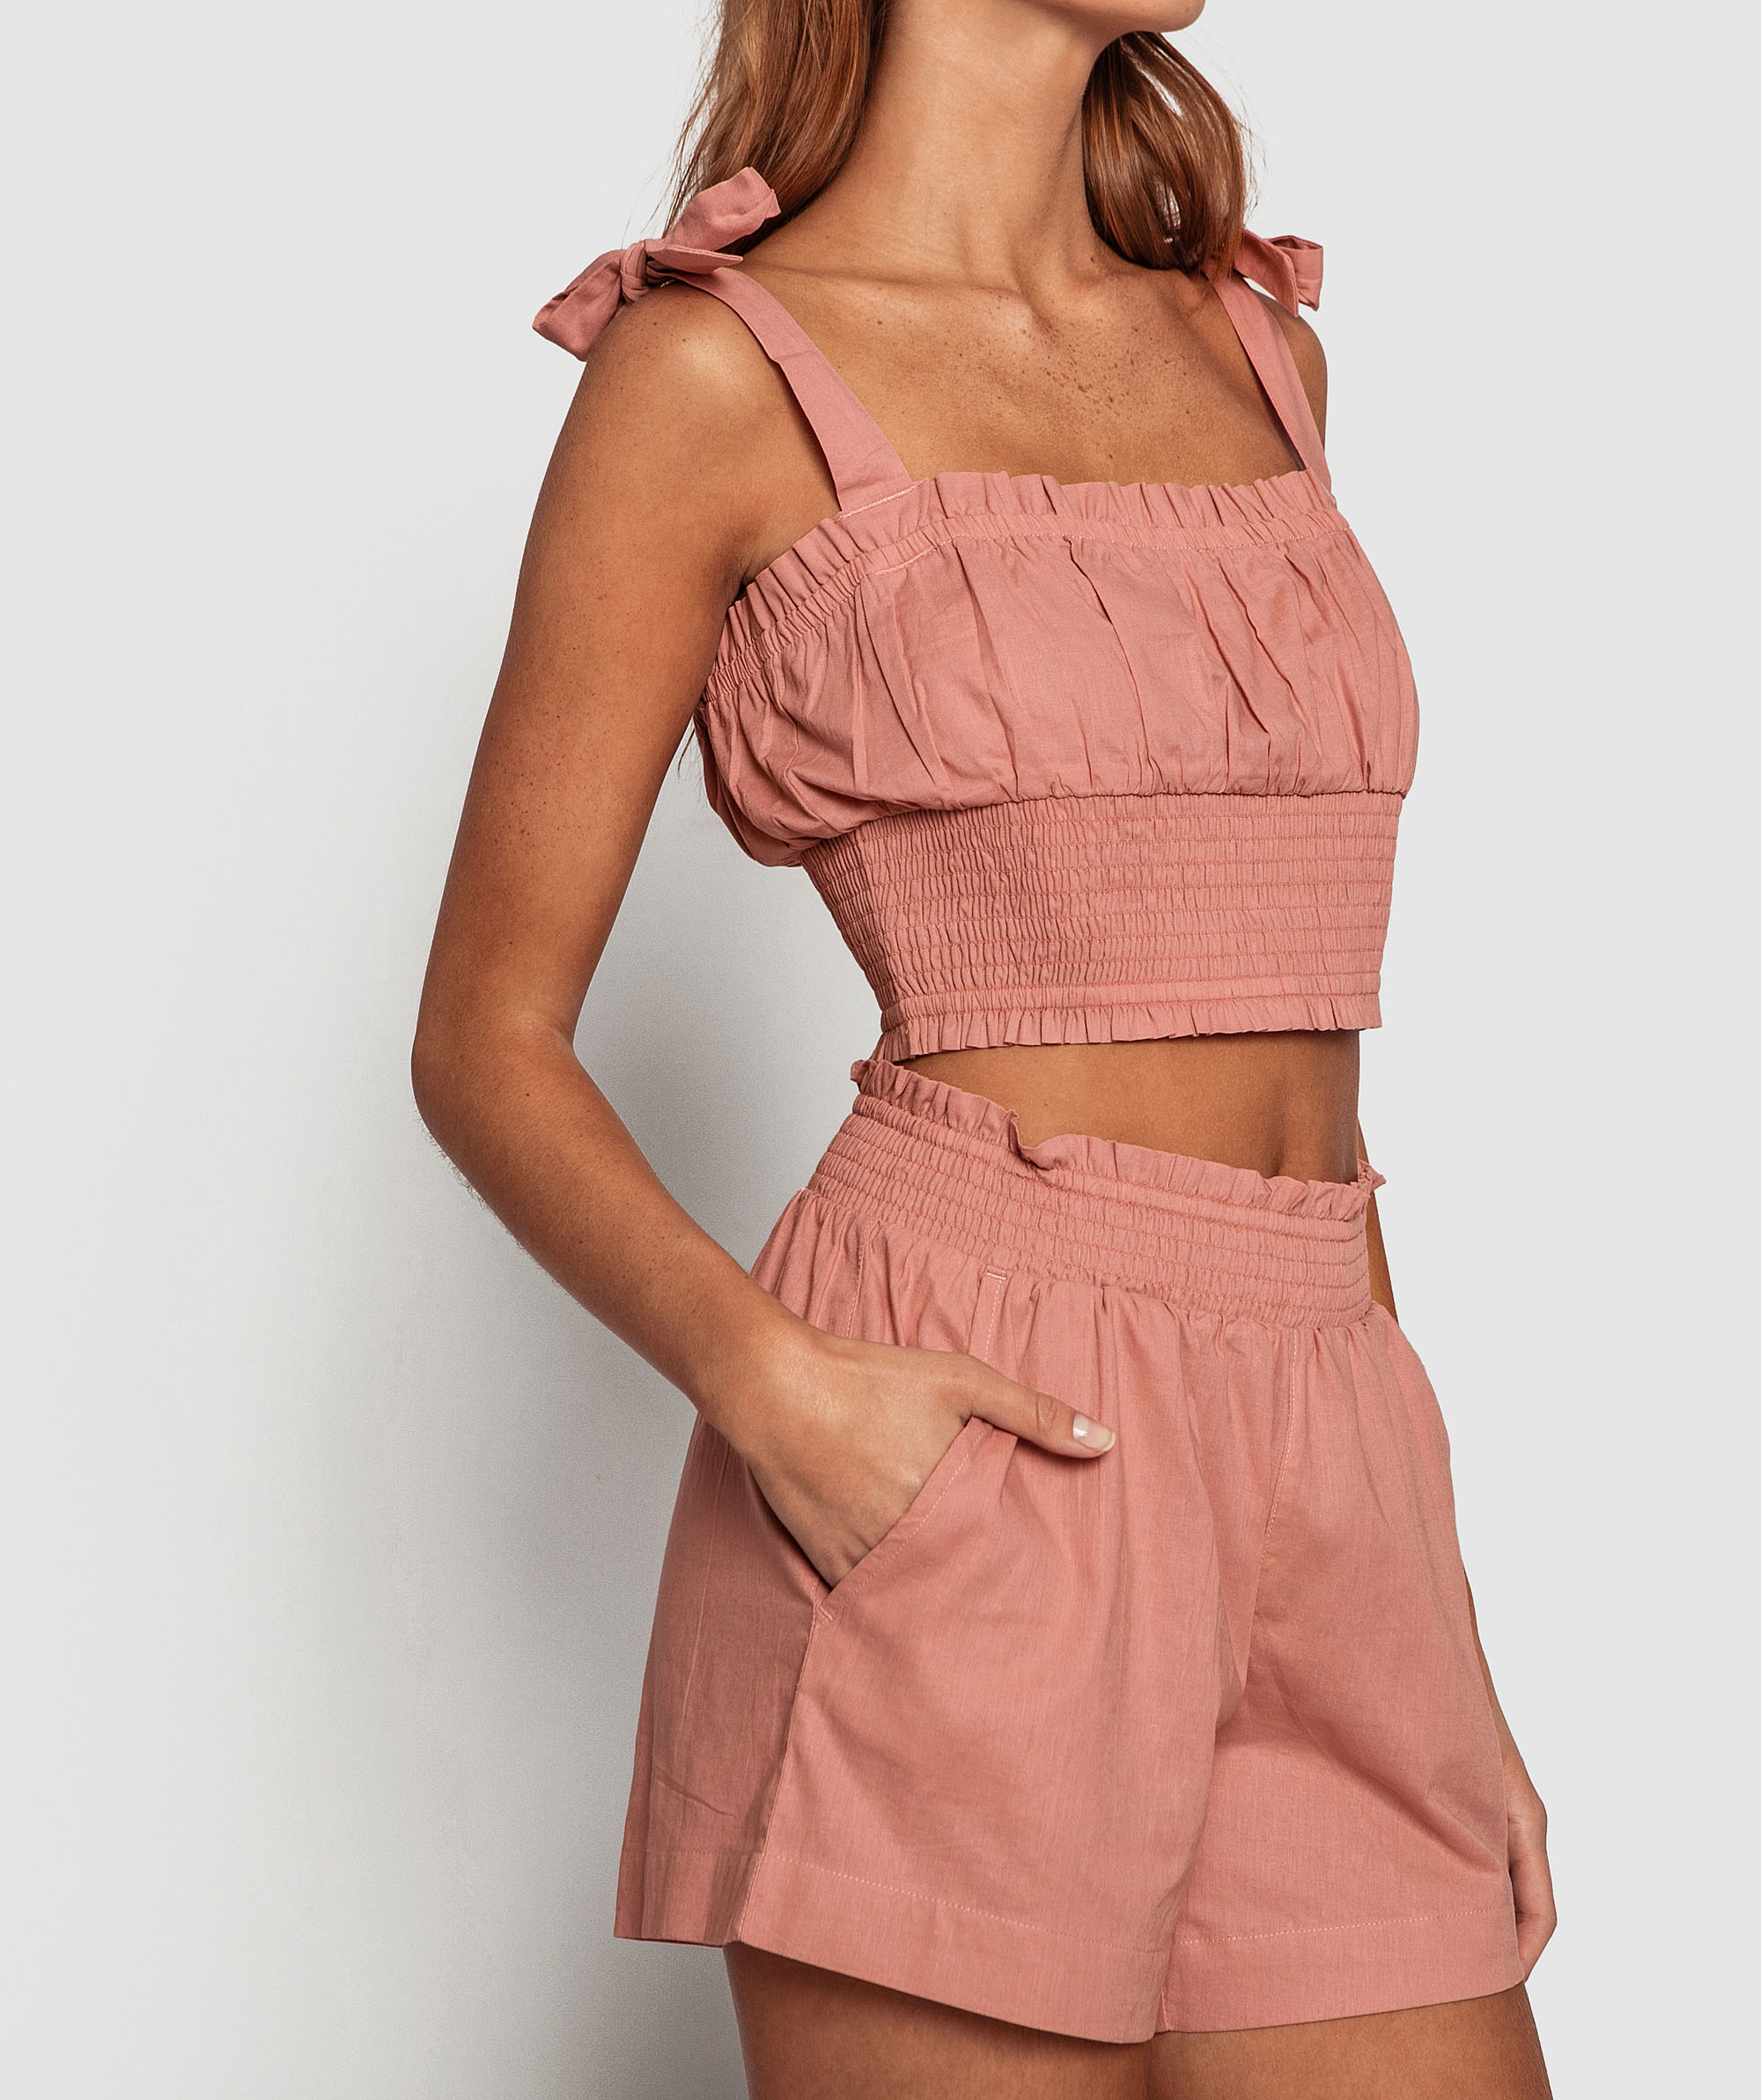 Staycation Cropped Cami- Pink